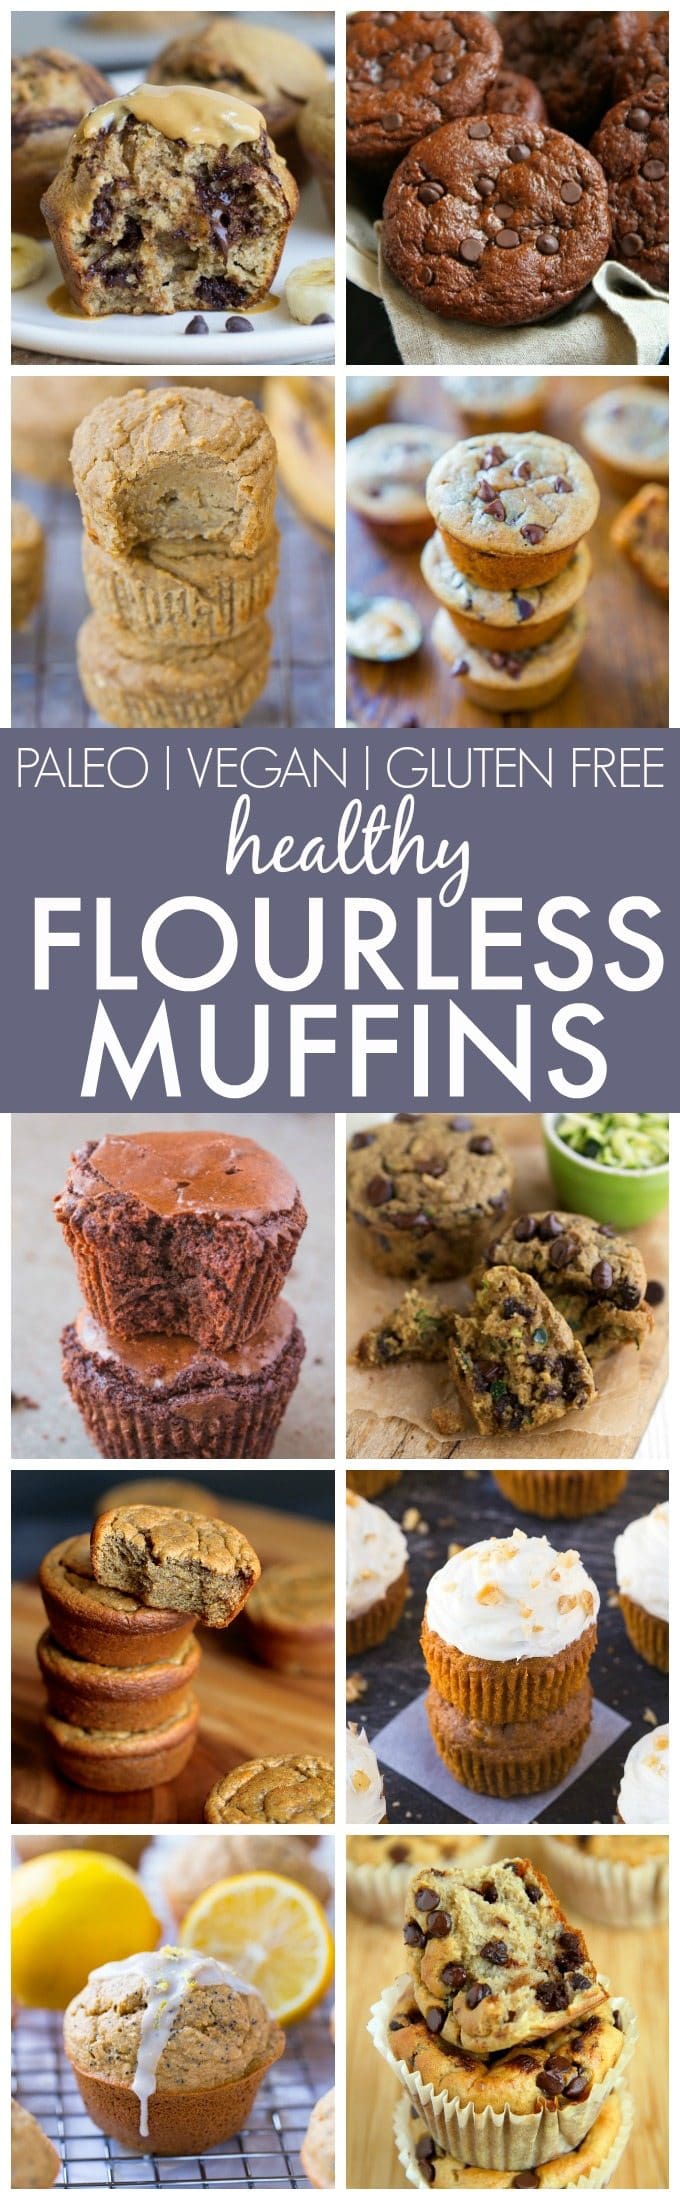 Healthy Flourless Muffins (V, GF, Paleo, DF)- The best clean eating muffins made with ZERO flour, butter, oil or refined sugar yet fluffy and delicious! Loads of diet options and perfect for breakfast and snacks! {vegan, gluten free, paleo recipe}- thebigmansworld.com